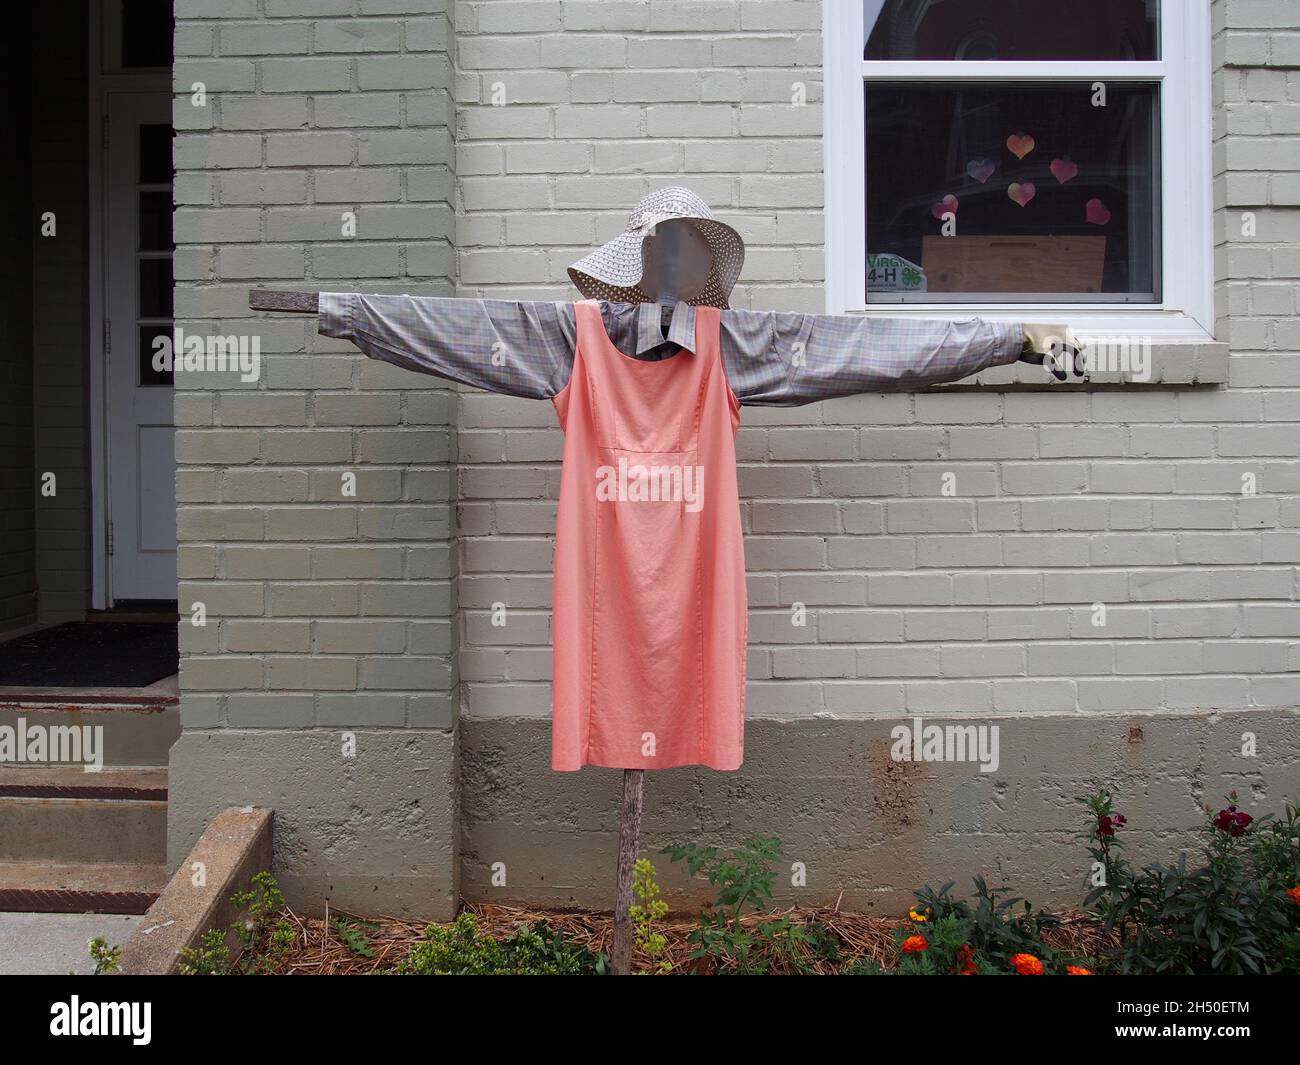 A scarecrow decoration in front of a painted brick wall, window and entrance, USA, 2021 © Katharine Andriotis Stock Photo